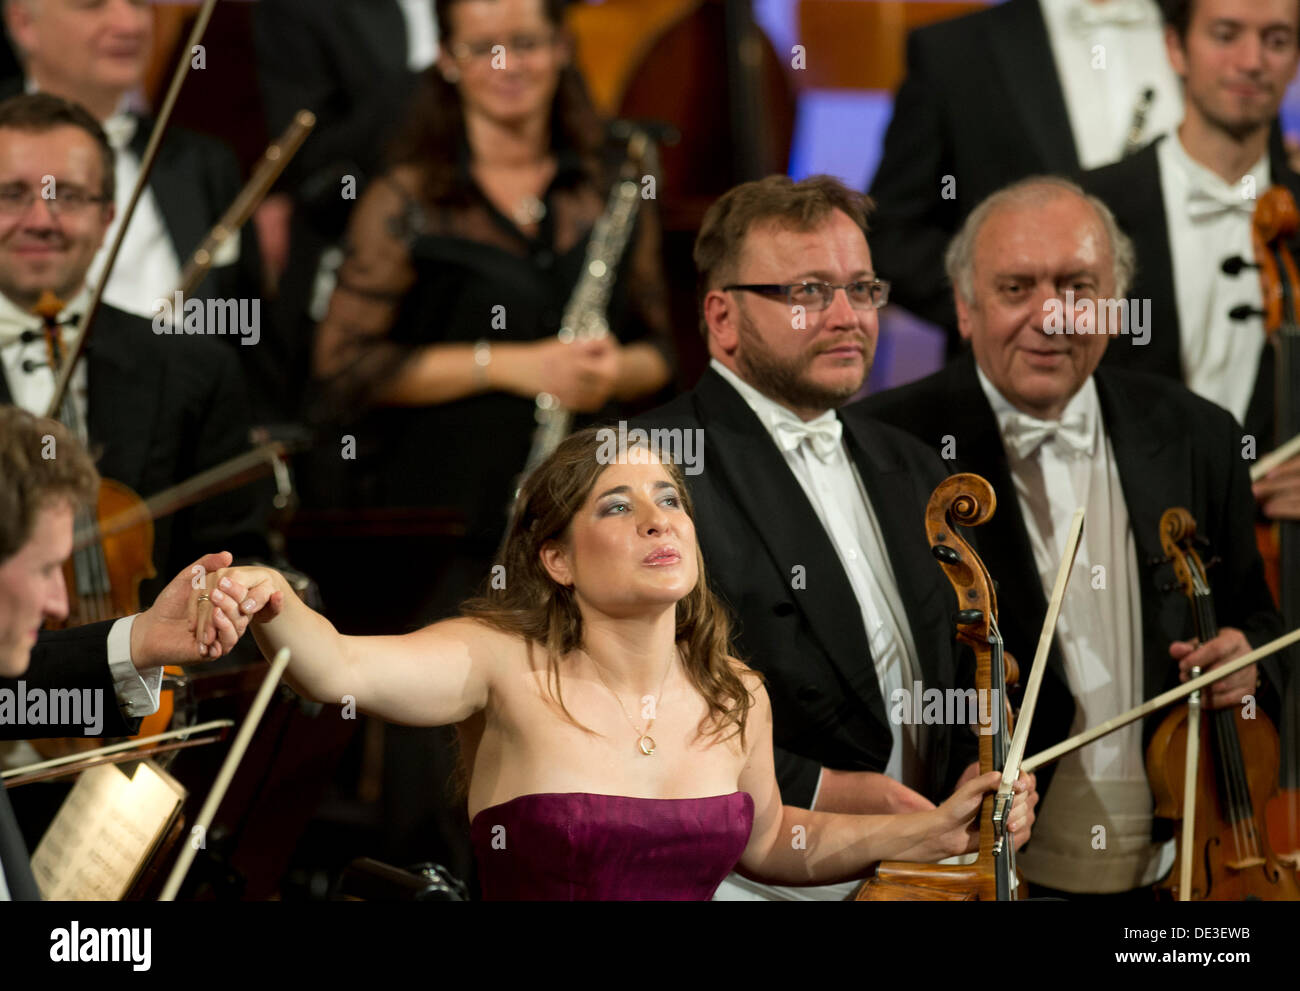 Prague, Czech Republic. 10th September 2013. Cellist Alisa Weilerstein thanks to the audience after performing with Czech Philharmony during the International Music Festival Dvorakova Praha in Prague, Czech Republic on September 10, 2013. (CTK Photo/Michal Kamaryt/Alamy Live News) Stock Photo